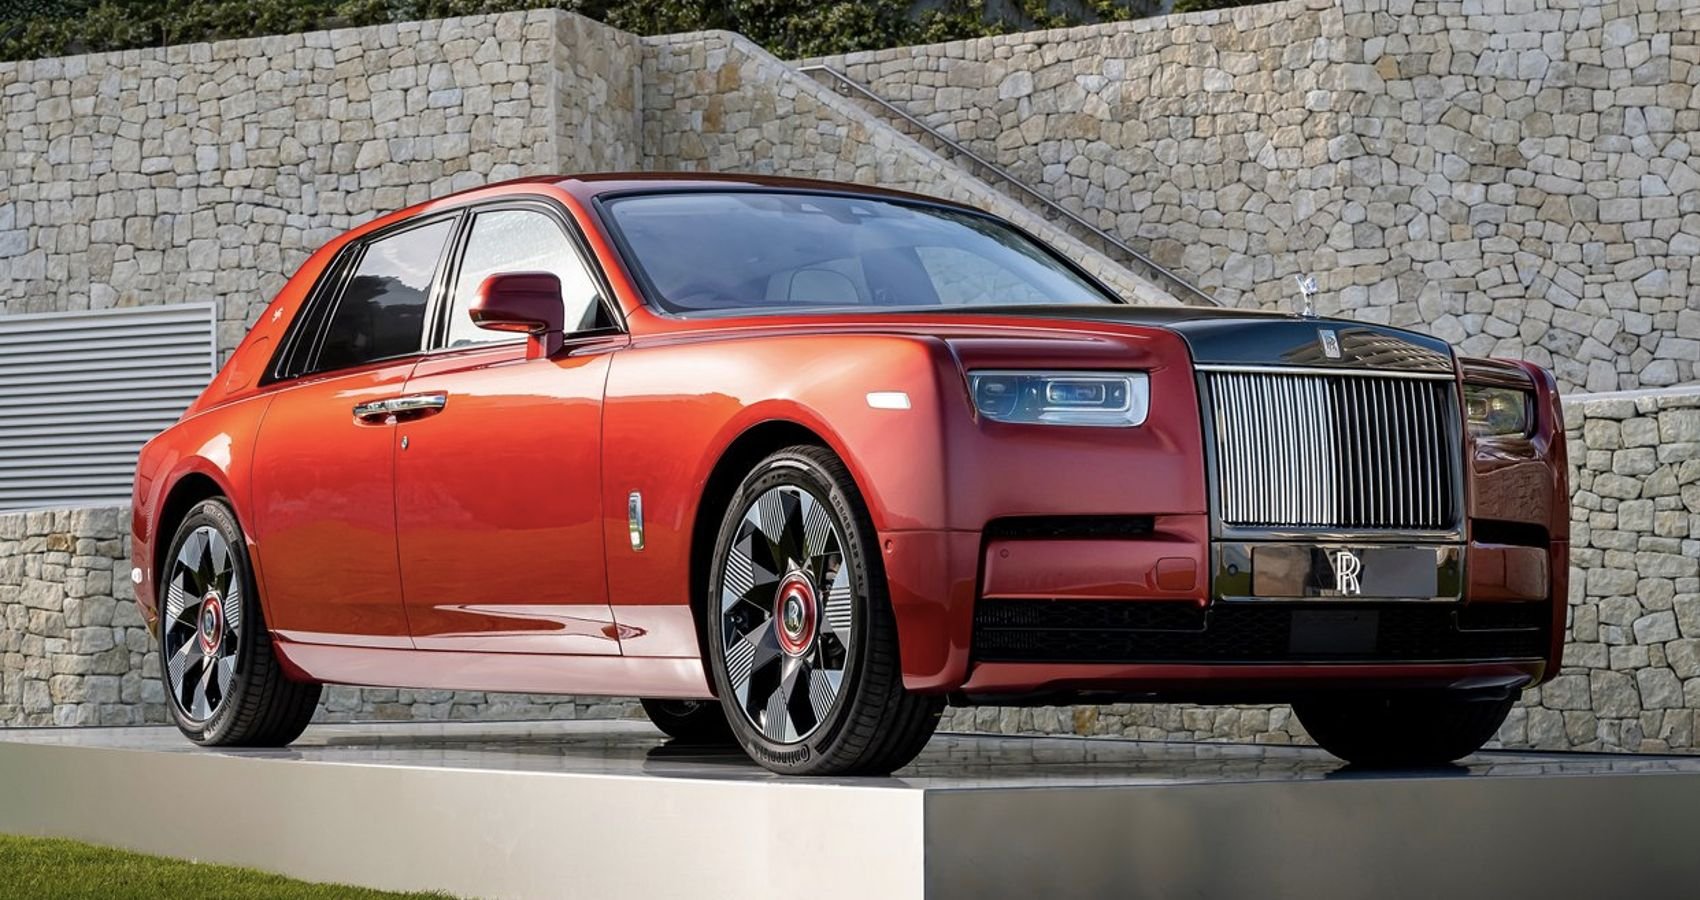 The World's Most Luxurious And Expensive Cars, Ranked